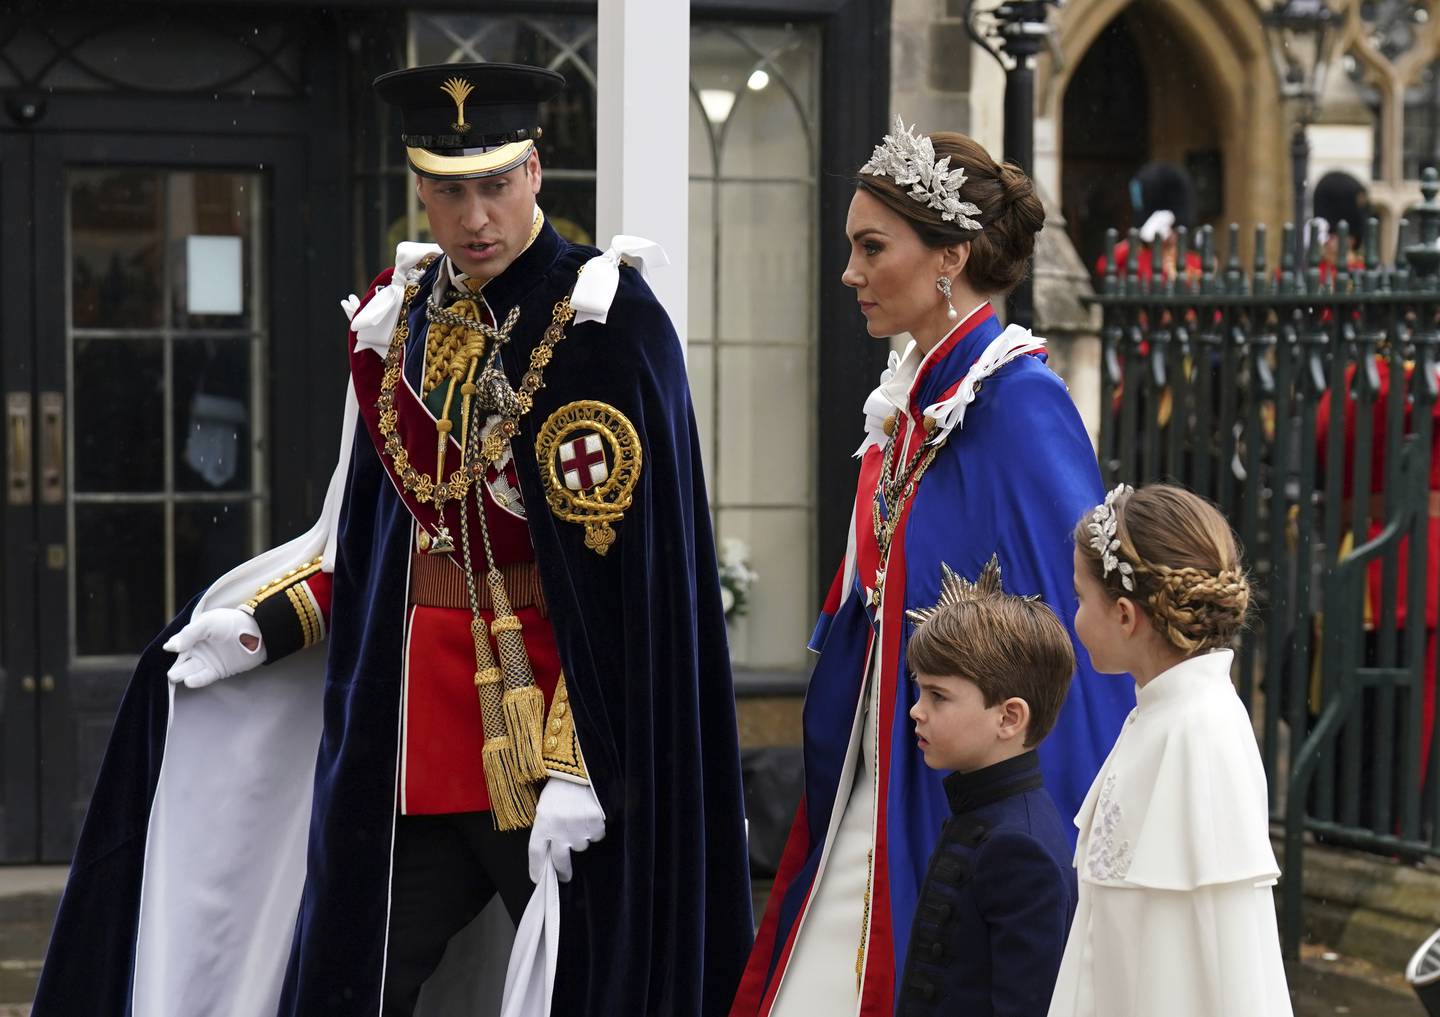 The Prince and Princess of Wales with Princess Charlotte and Prince Louis make their way into the King's coronation ceremony. Photo / AP